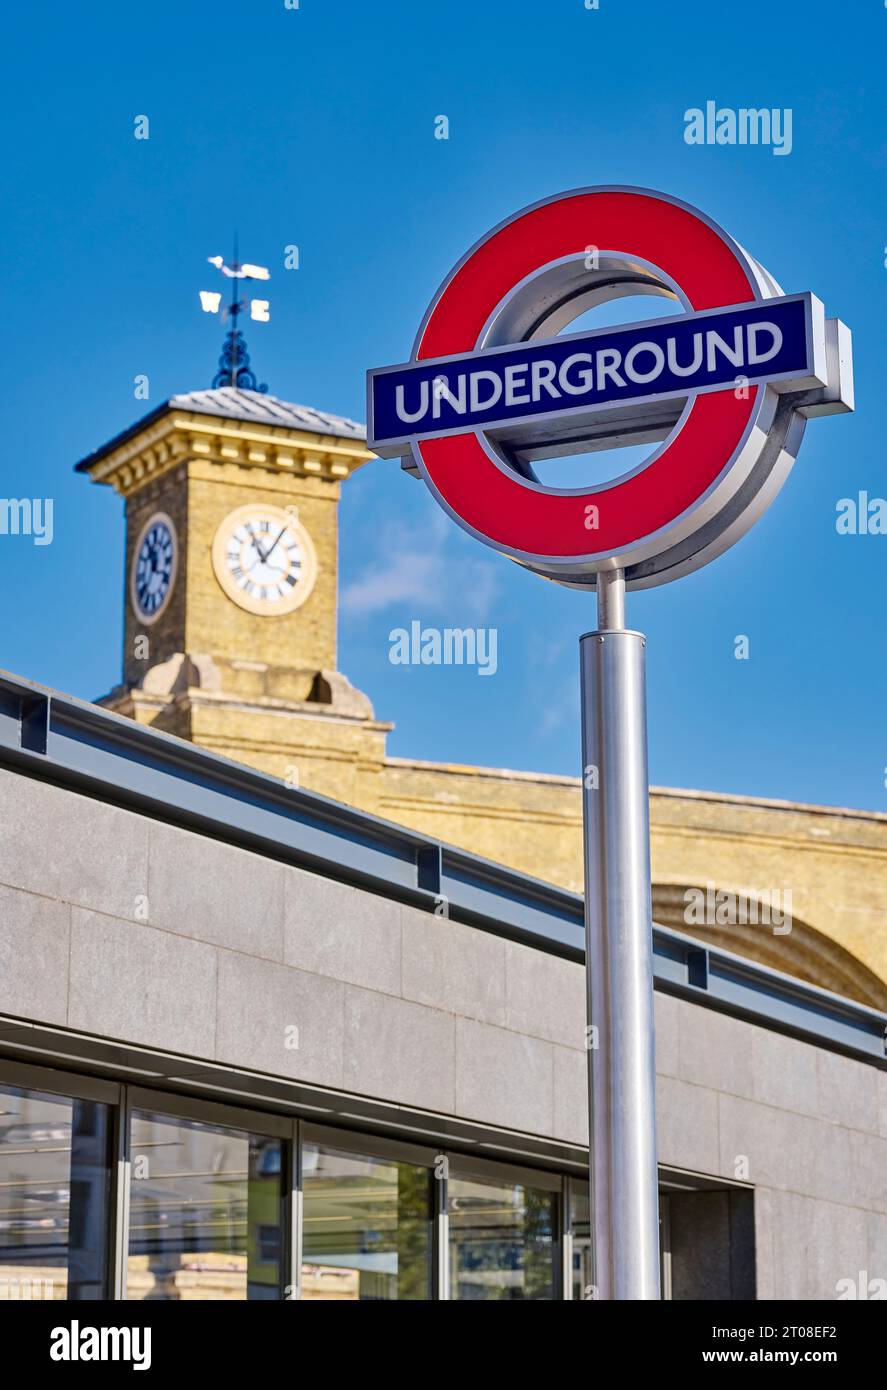 Underground sign at Kings Cross Station - London Stock Photo